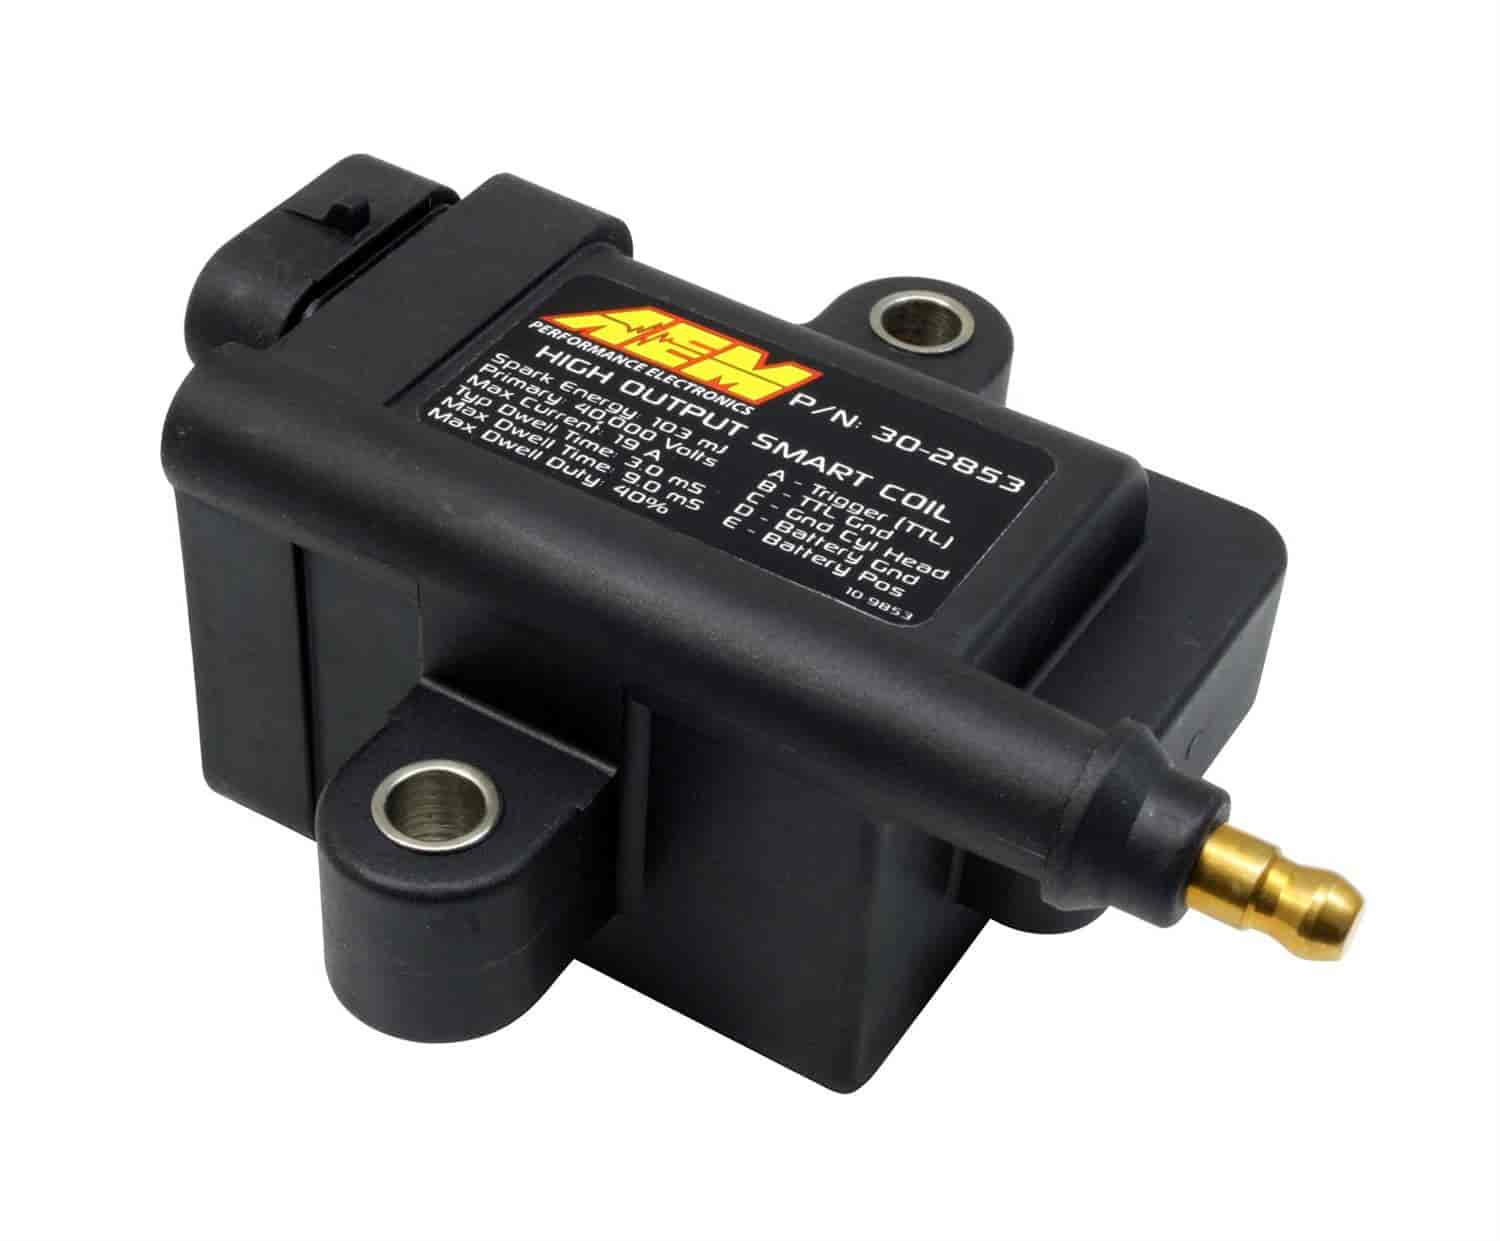 AEM High-Output Inductive Ignition Coils